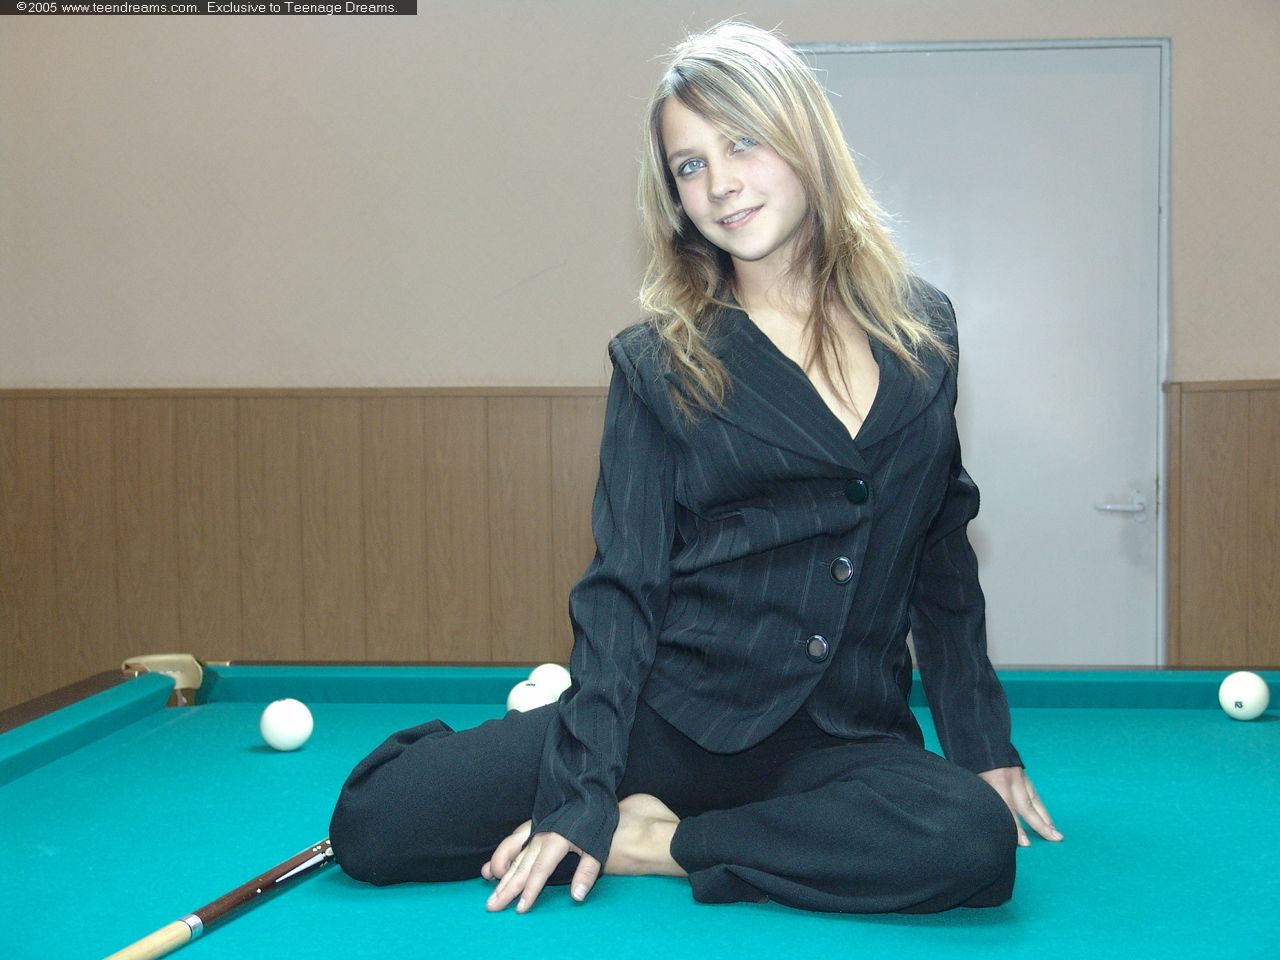 russian-babe-gets-naked-on-a-snooker-table-2